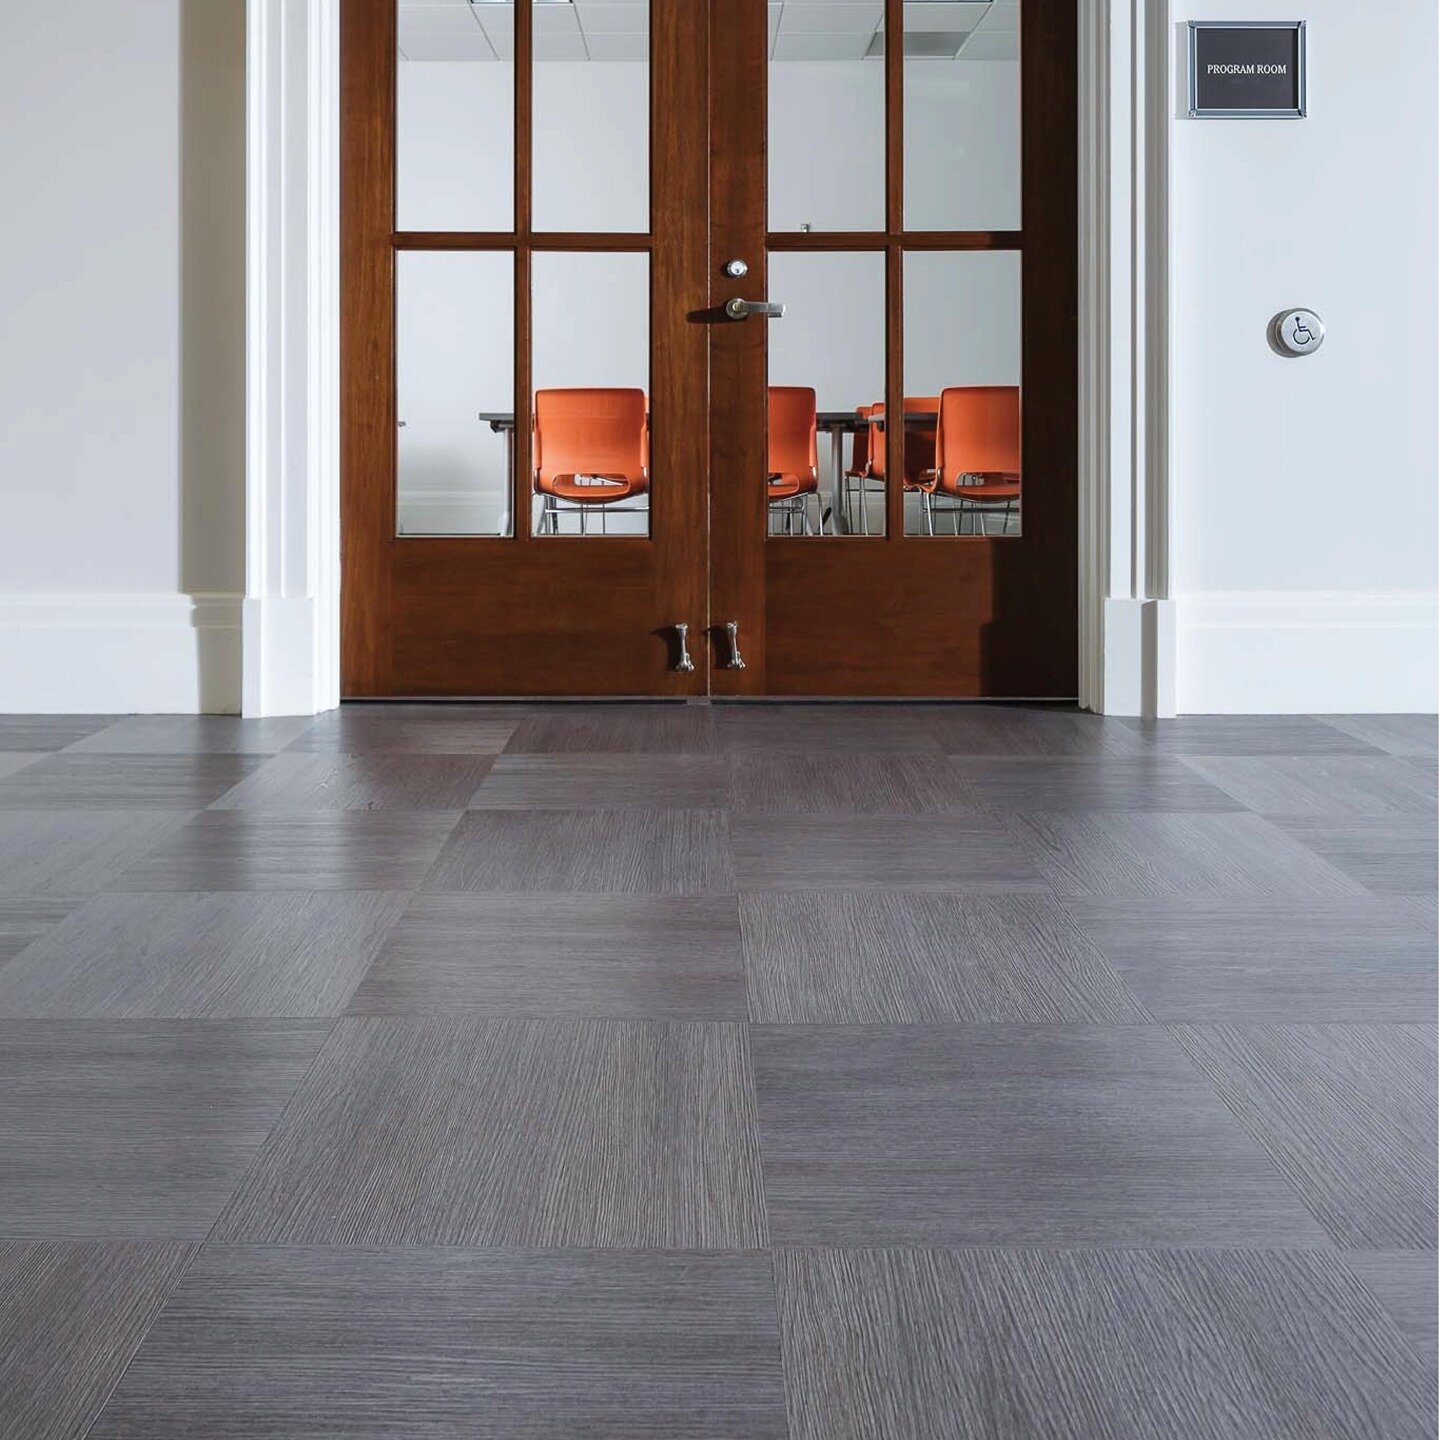 Functional, low-maintenance and durable. We're ready for these library doors to be open, and to collaborate together again.

Our T3 LVT is versatile, consistent and cost effective. Learn more at Teknoflor.com/T3

#interiordesign #design #commercialde